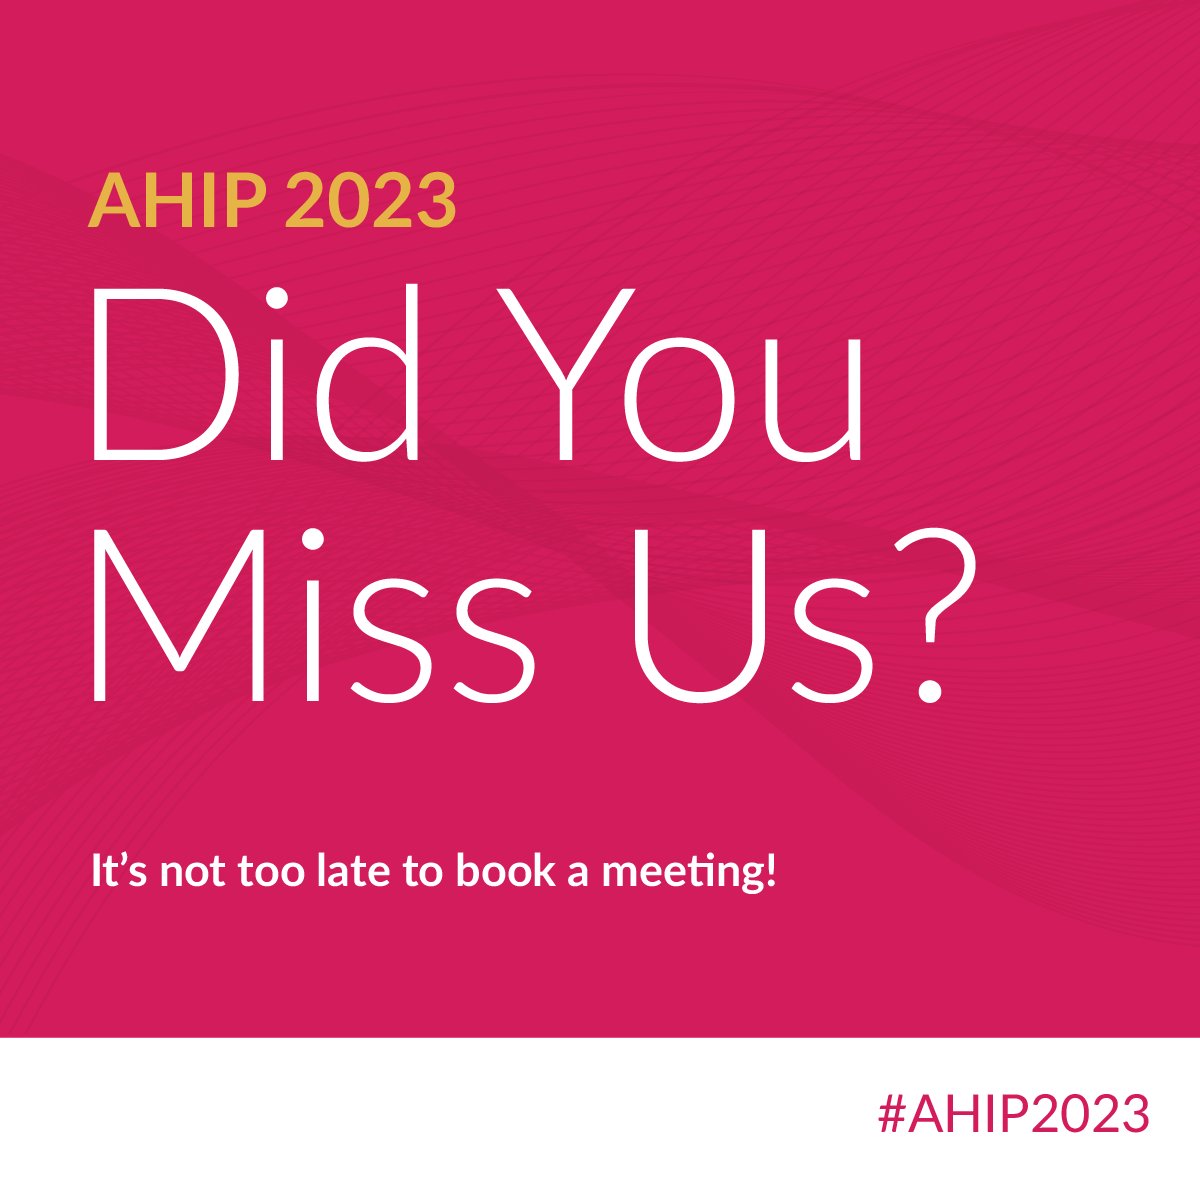 AHIP Conference 2023 was incredible! We had an amazing time connecting with industry leaders, sharing insights, & learning how to support your goals. If you missed us at the conference, let's make time to explore how our solutions can drive your organization’s success. #AHIP2023